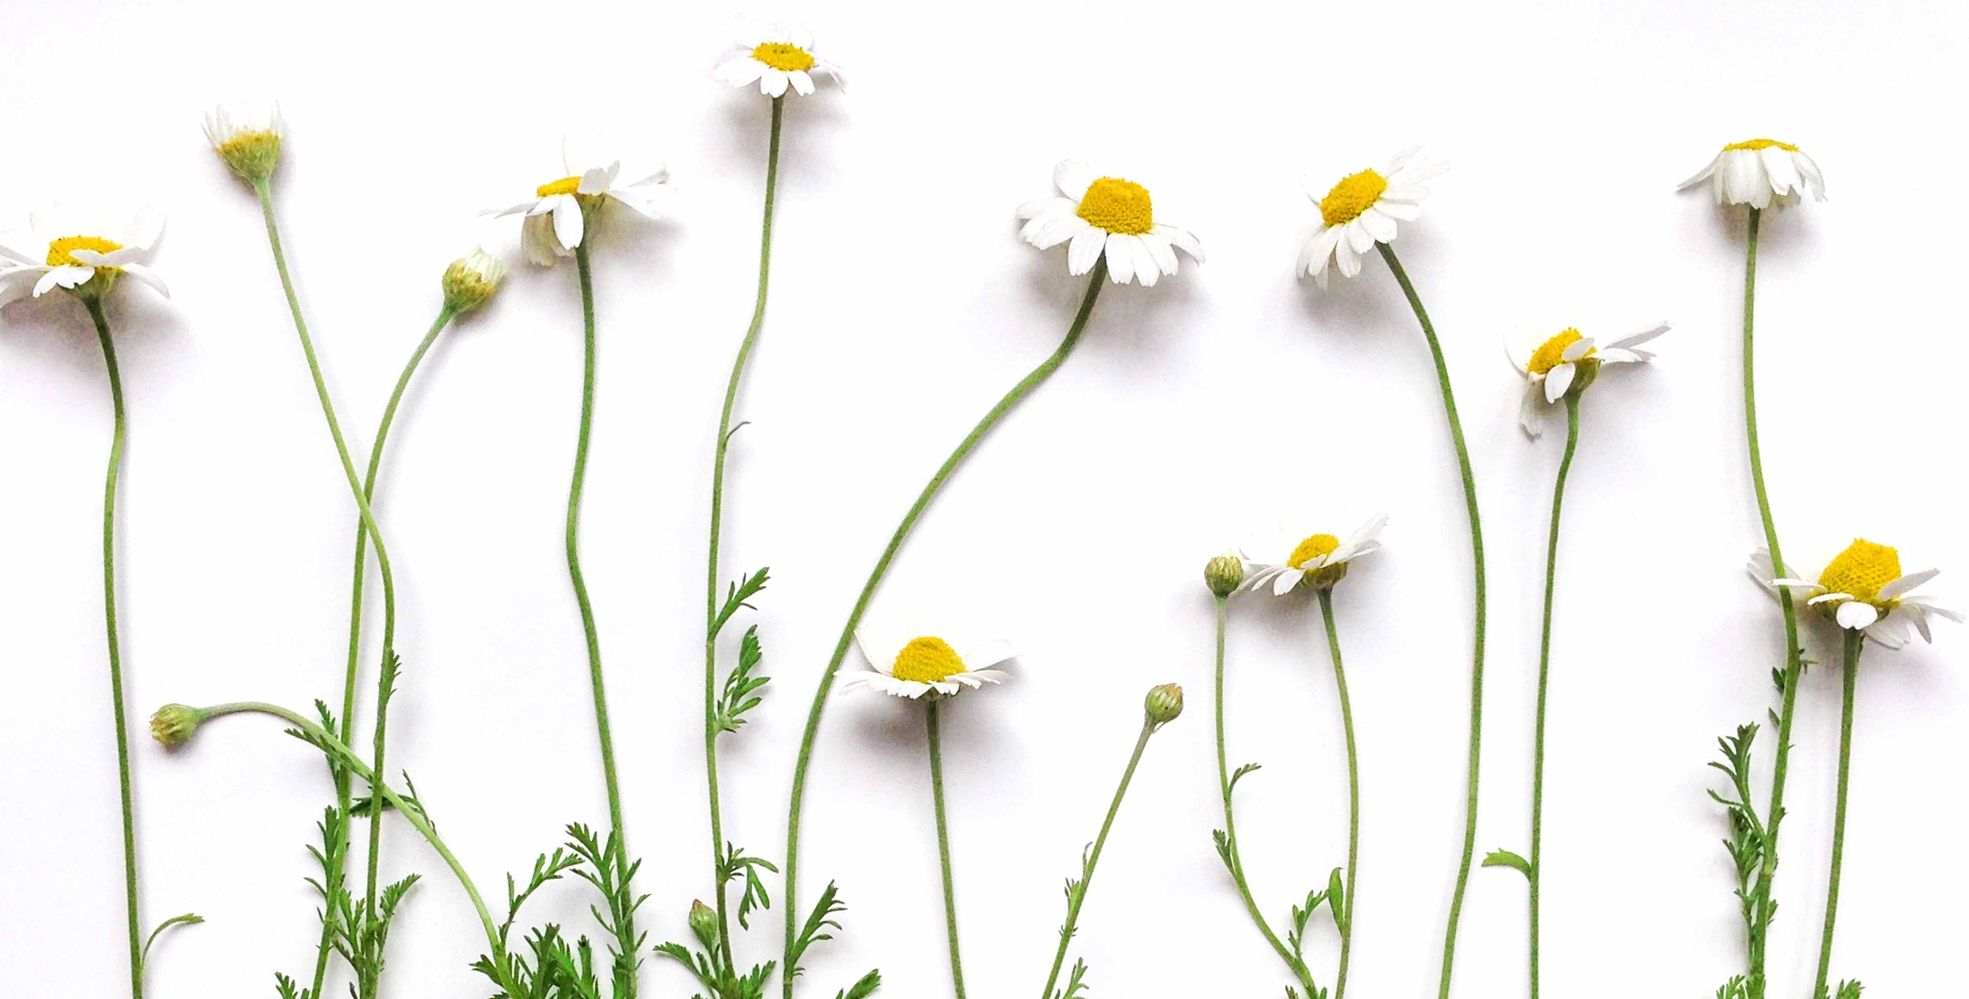 Chamomile flowers on a white background.